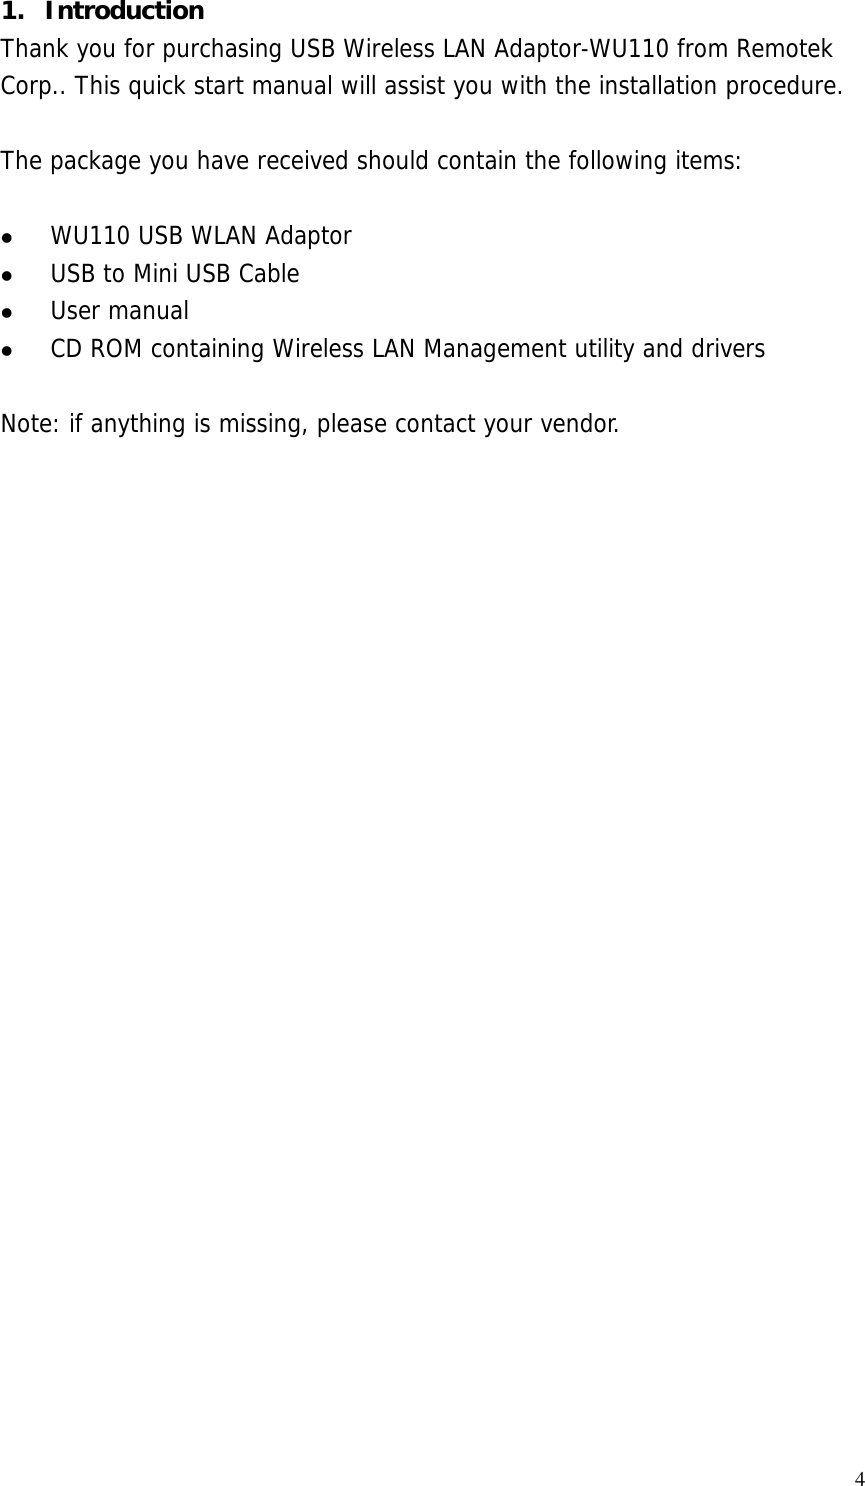  41. Introduction Thank you for purchasing USB Wireless LAN Adaptor-WU110 from Remotek Corp.. This quick start manual will assist you with the installation procedure.   The package you have received should contain the following items:    WU110 USB WLAN Adaptor   USB to Mini USB Cable   User manual   CD ROM containing Wireless LAN Management utility and drivers  Note: if anything is missing, please contact your vendor.  